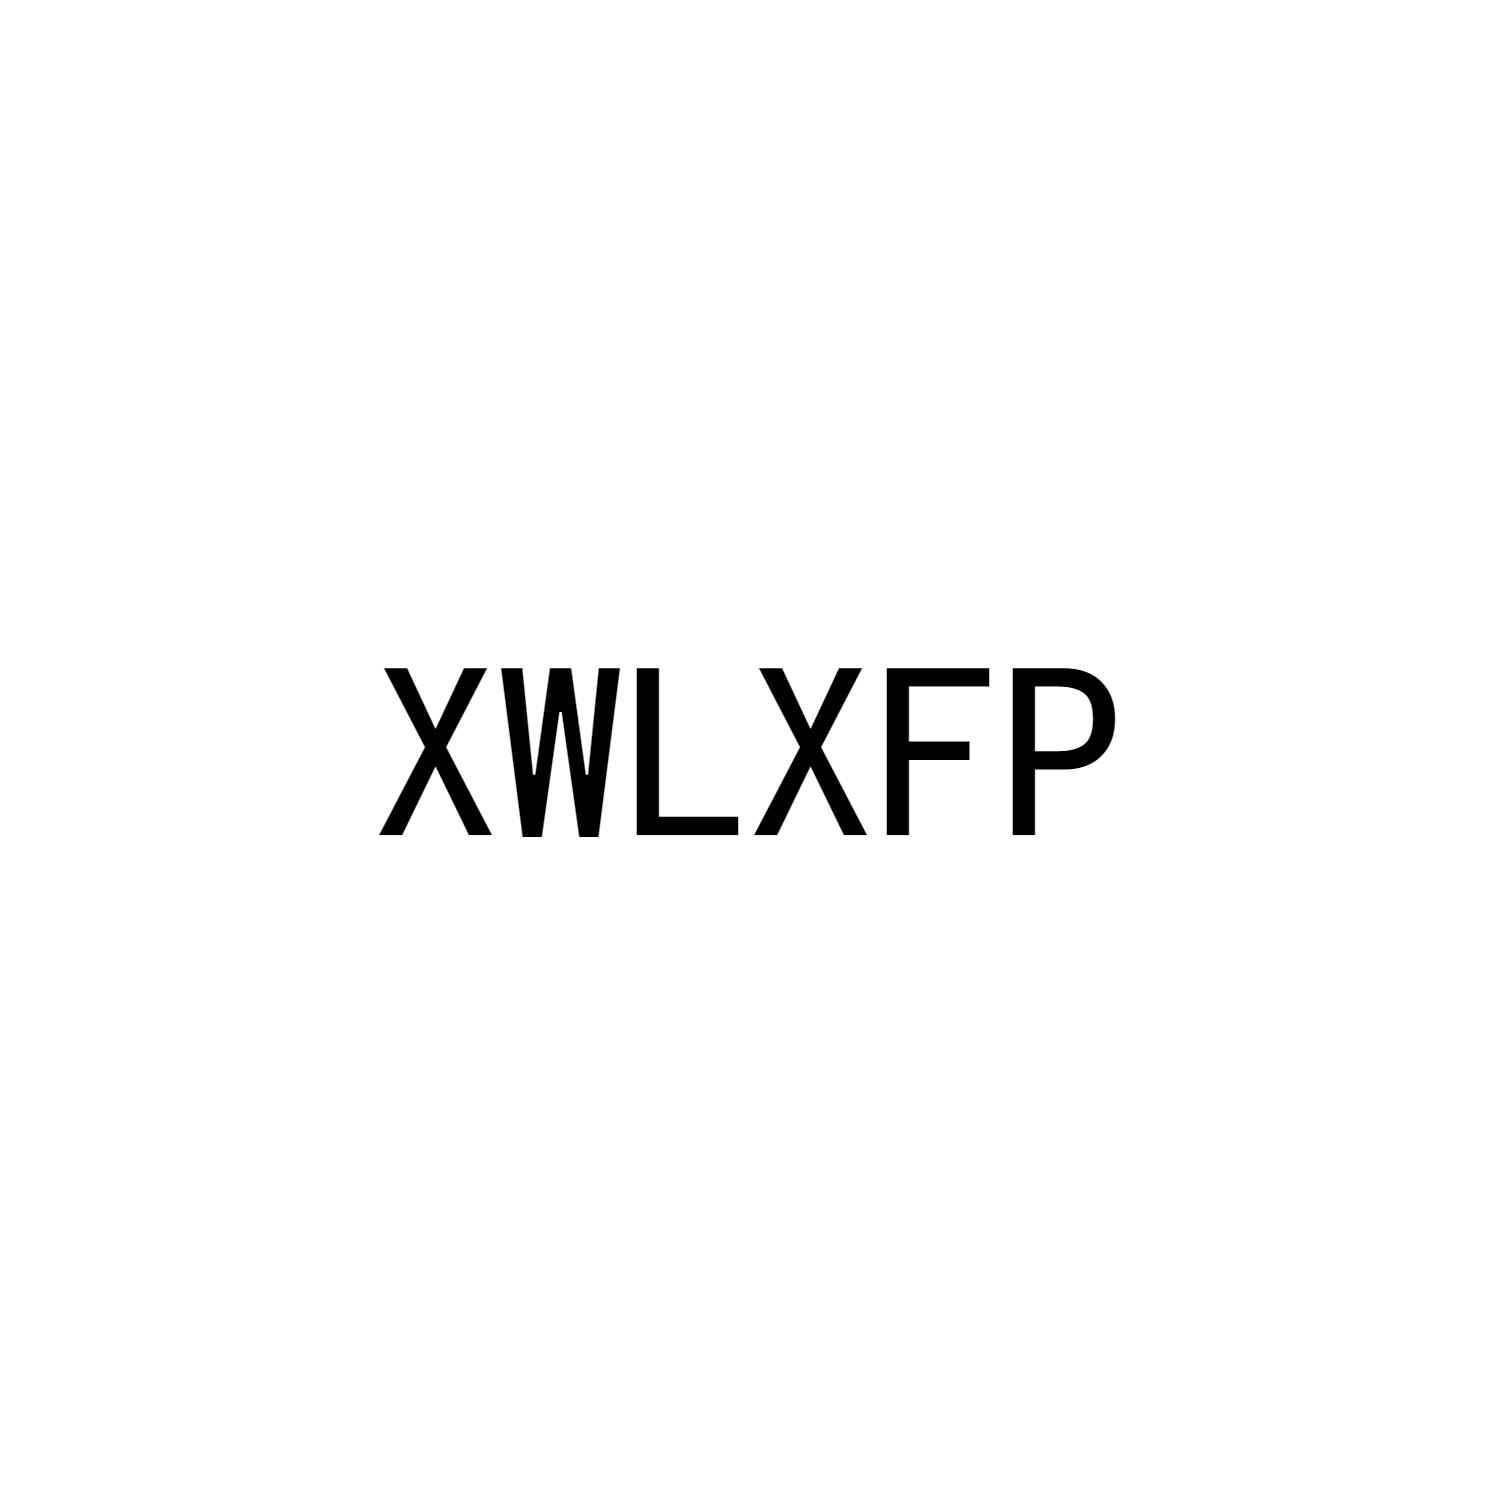 XWLXFP